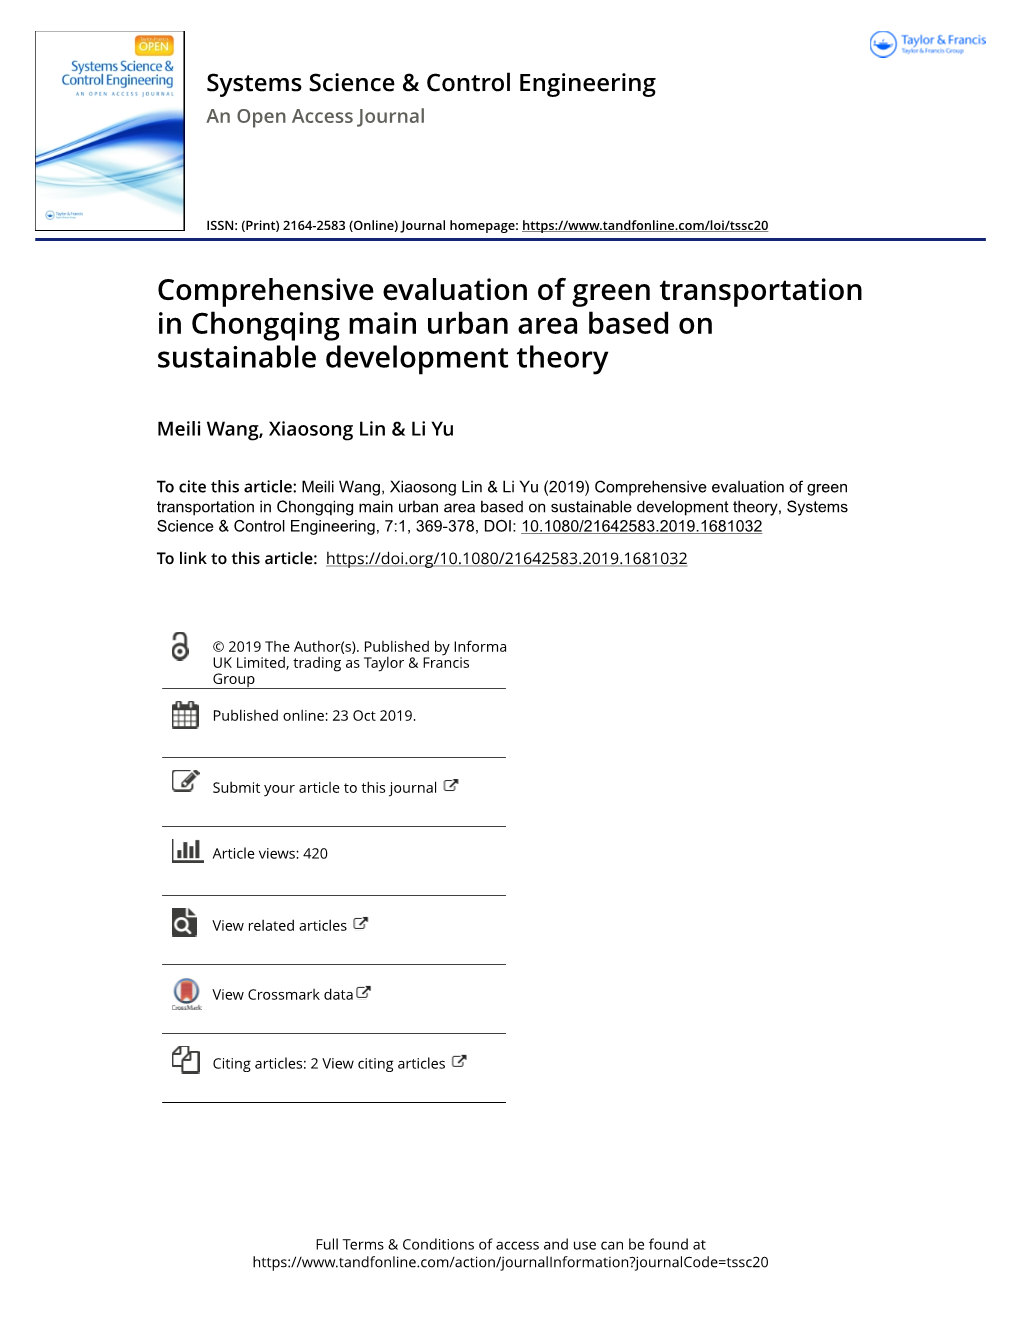 Comprehensive Evaluation of Green Transportation in Chongqing Main Urban Area Based on Sustainable Development Theory